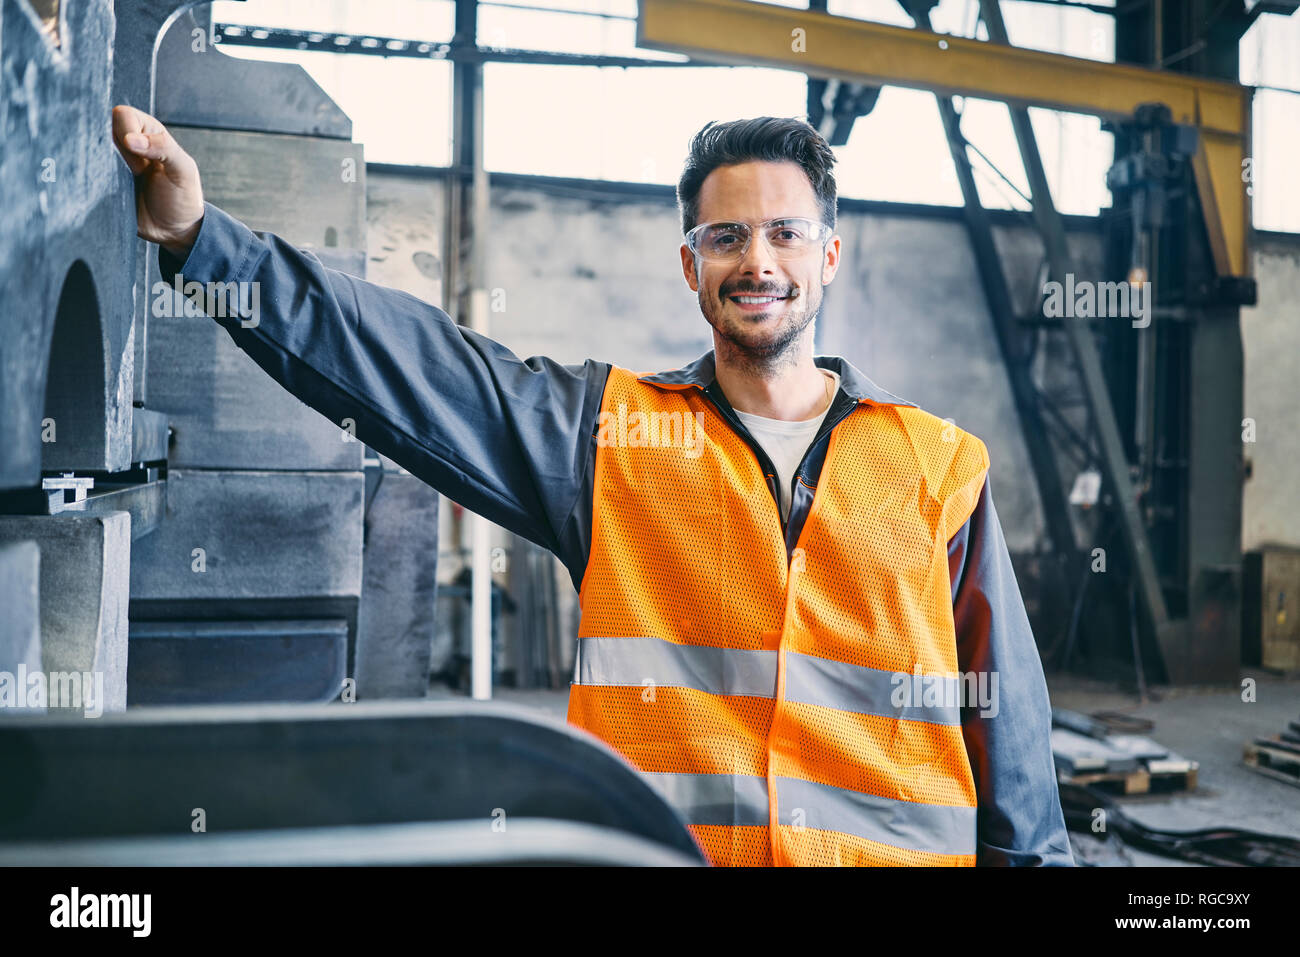 Portrait of smiling man wearing protective workwear in factory Stock Photo